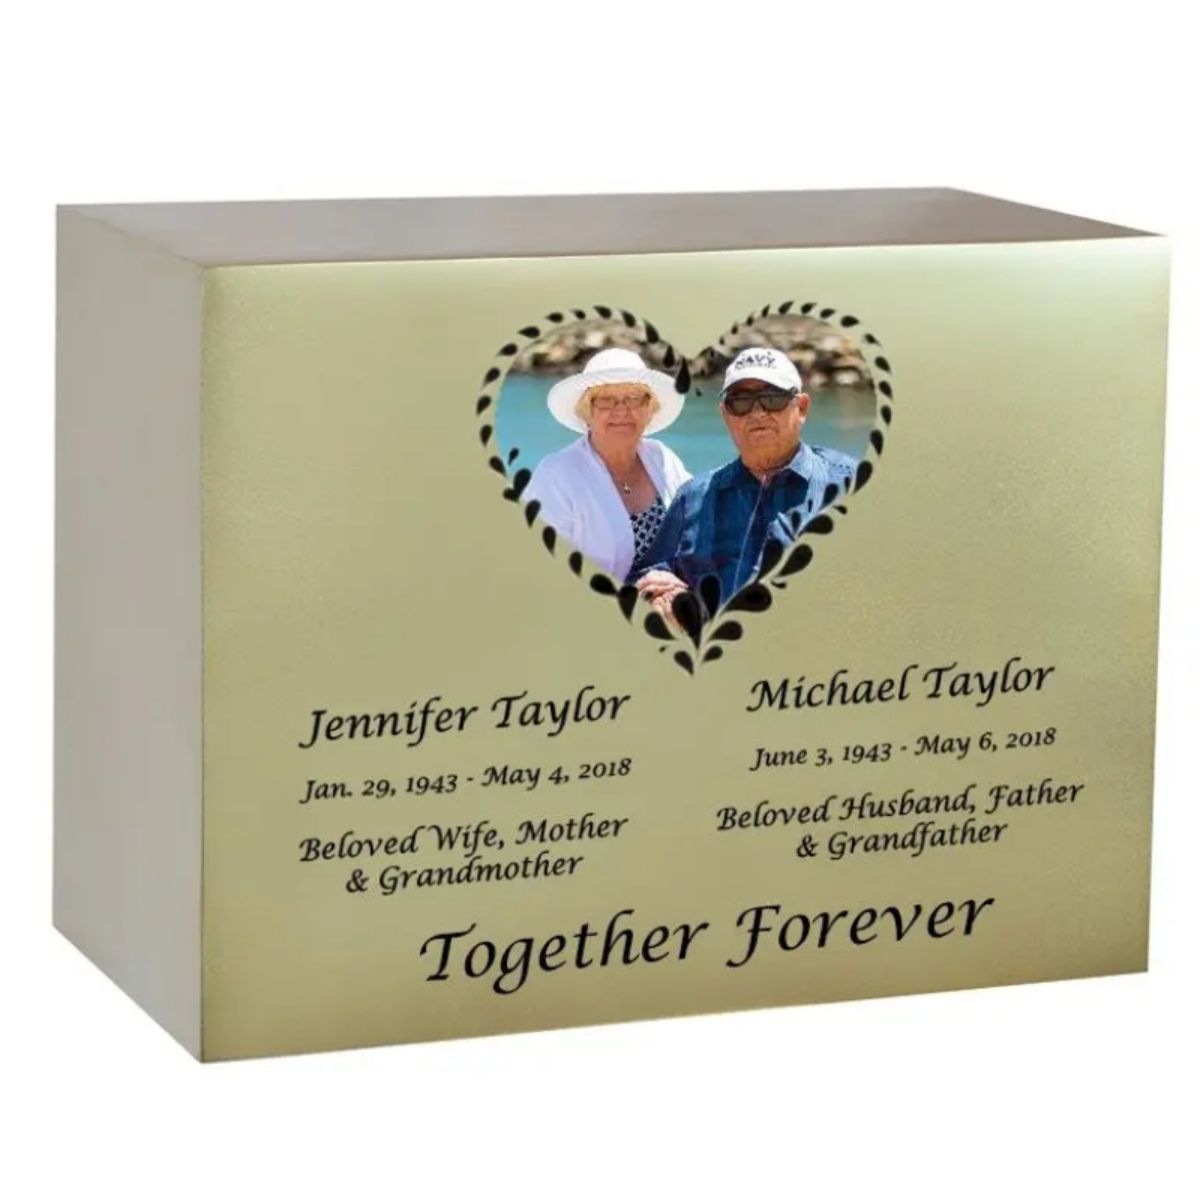 The Photo Heart Companion Gold Urn is a handmade wood urn for two people. This beautiful eternal lasting wood urn can be personalized with an image in color or black and white with engraving for each person and a sentiment at the bottom.